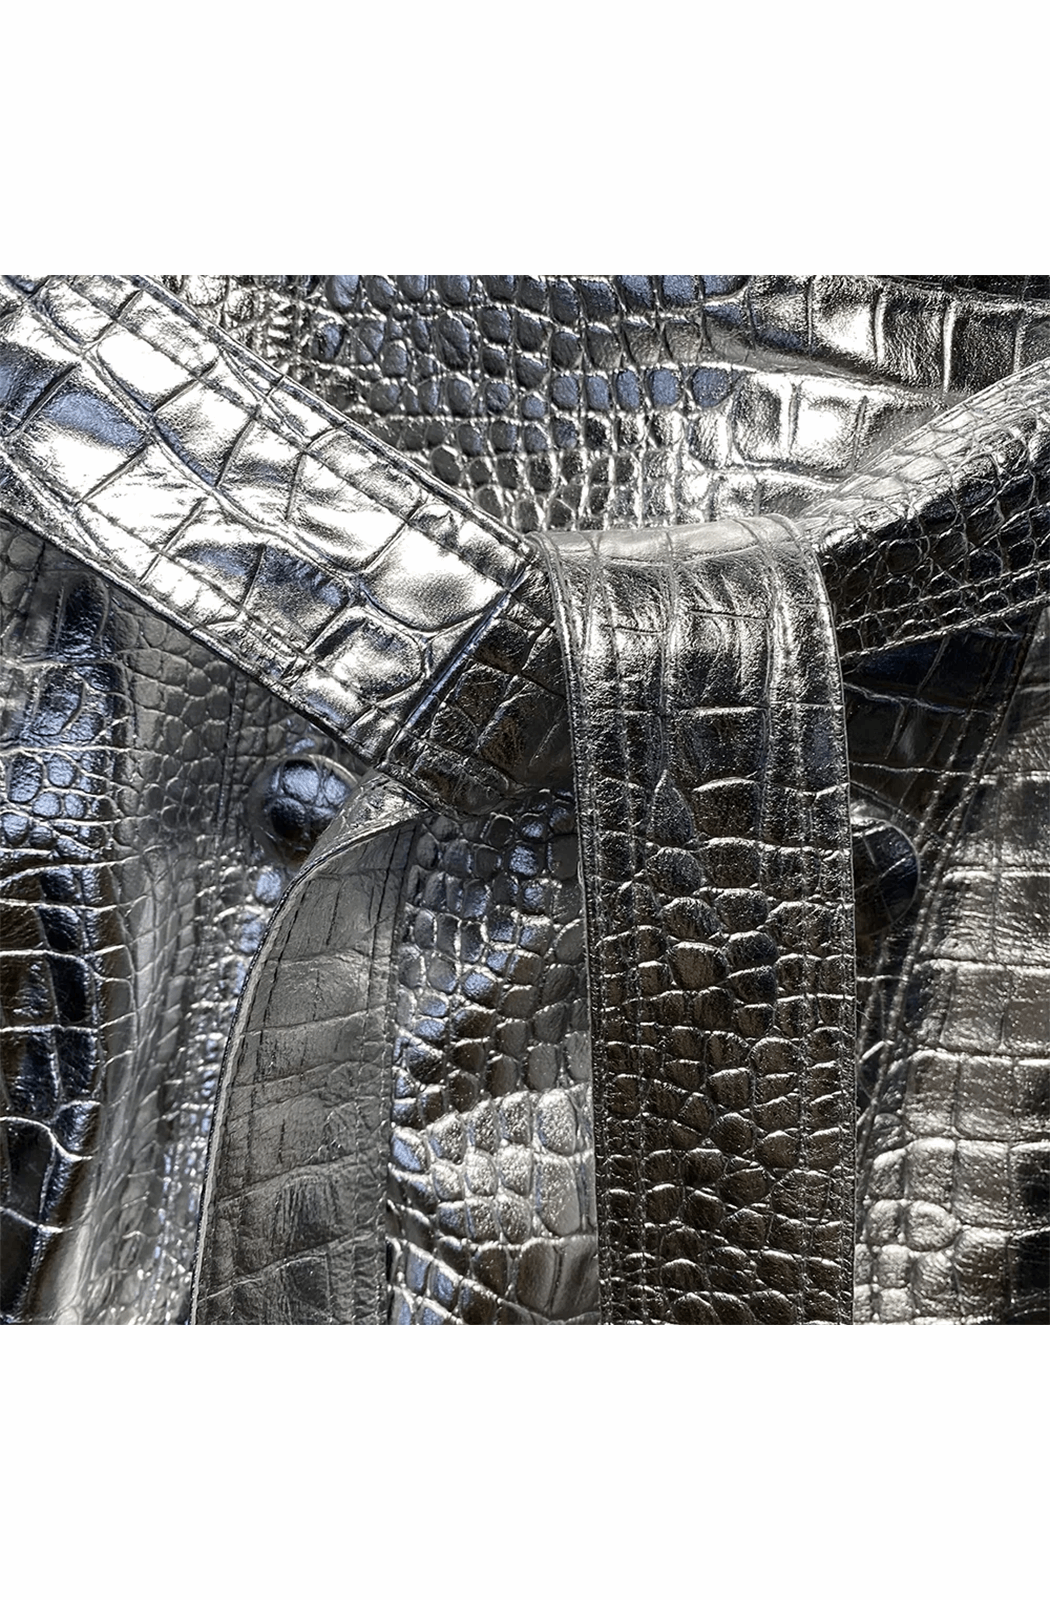 Silver croco pattern leather trench coat